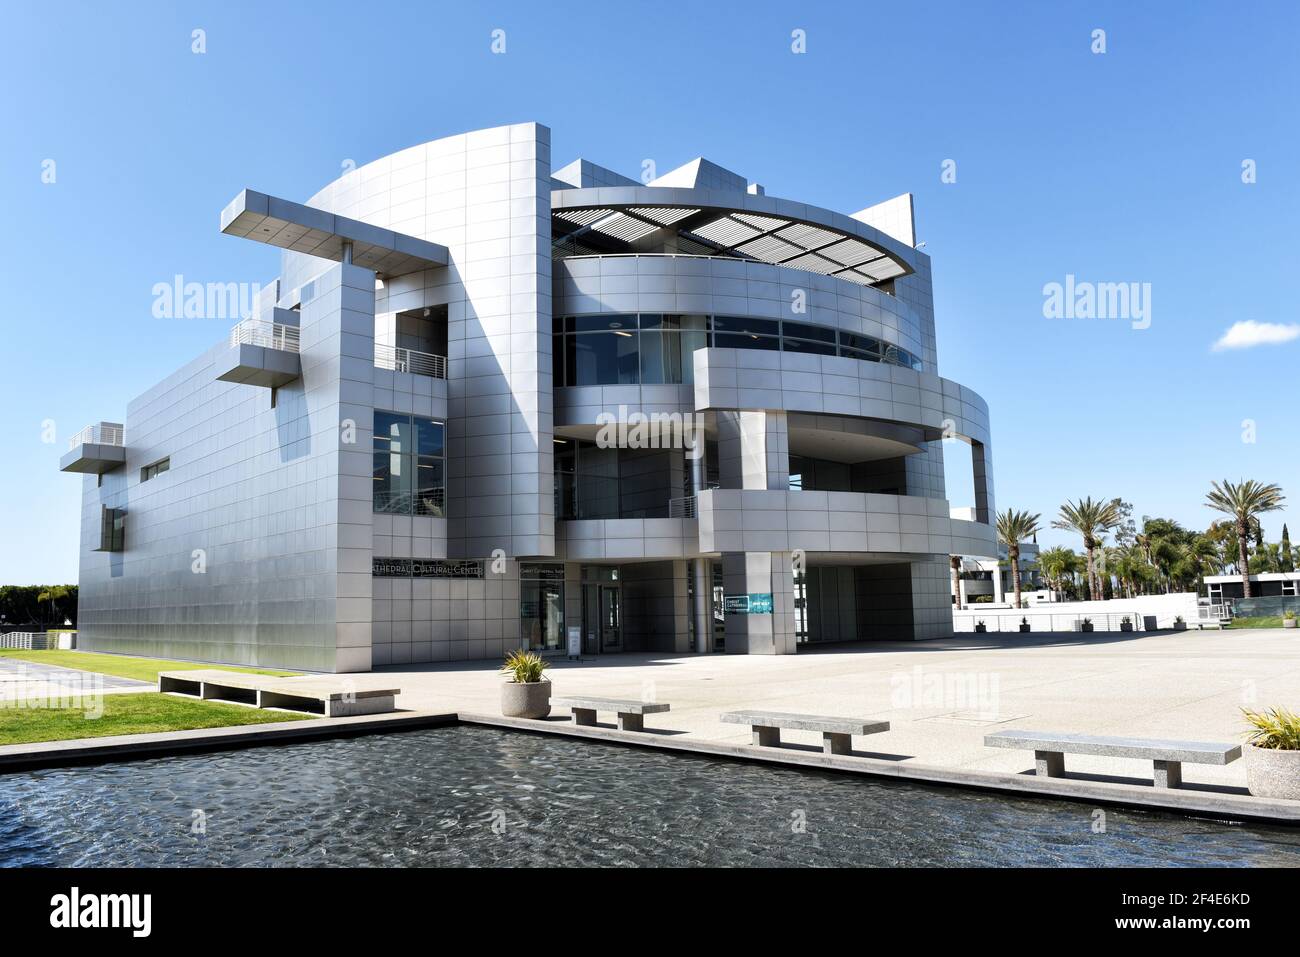 GARDEN GROVE, CALIFORNIA - 20 MAR 2021: Cultural Center at the Crystal Cathedral with pool in the foreground. Stock Photo